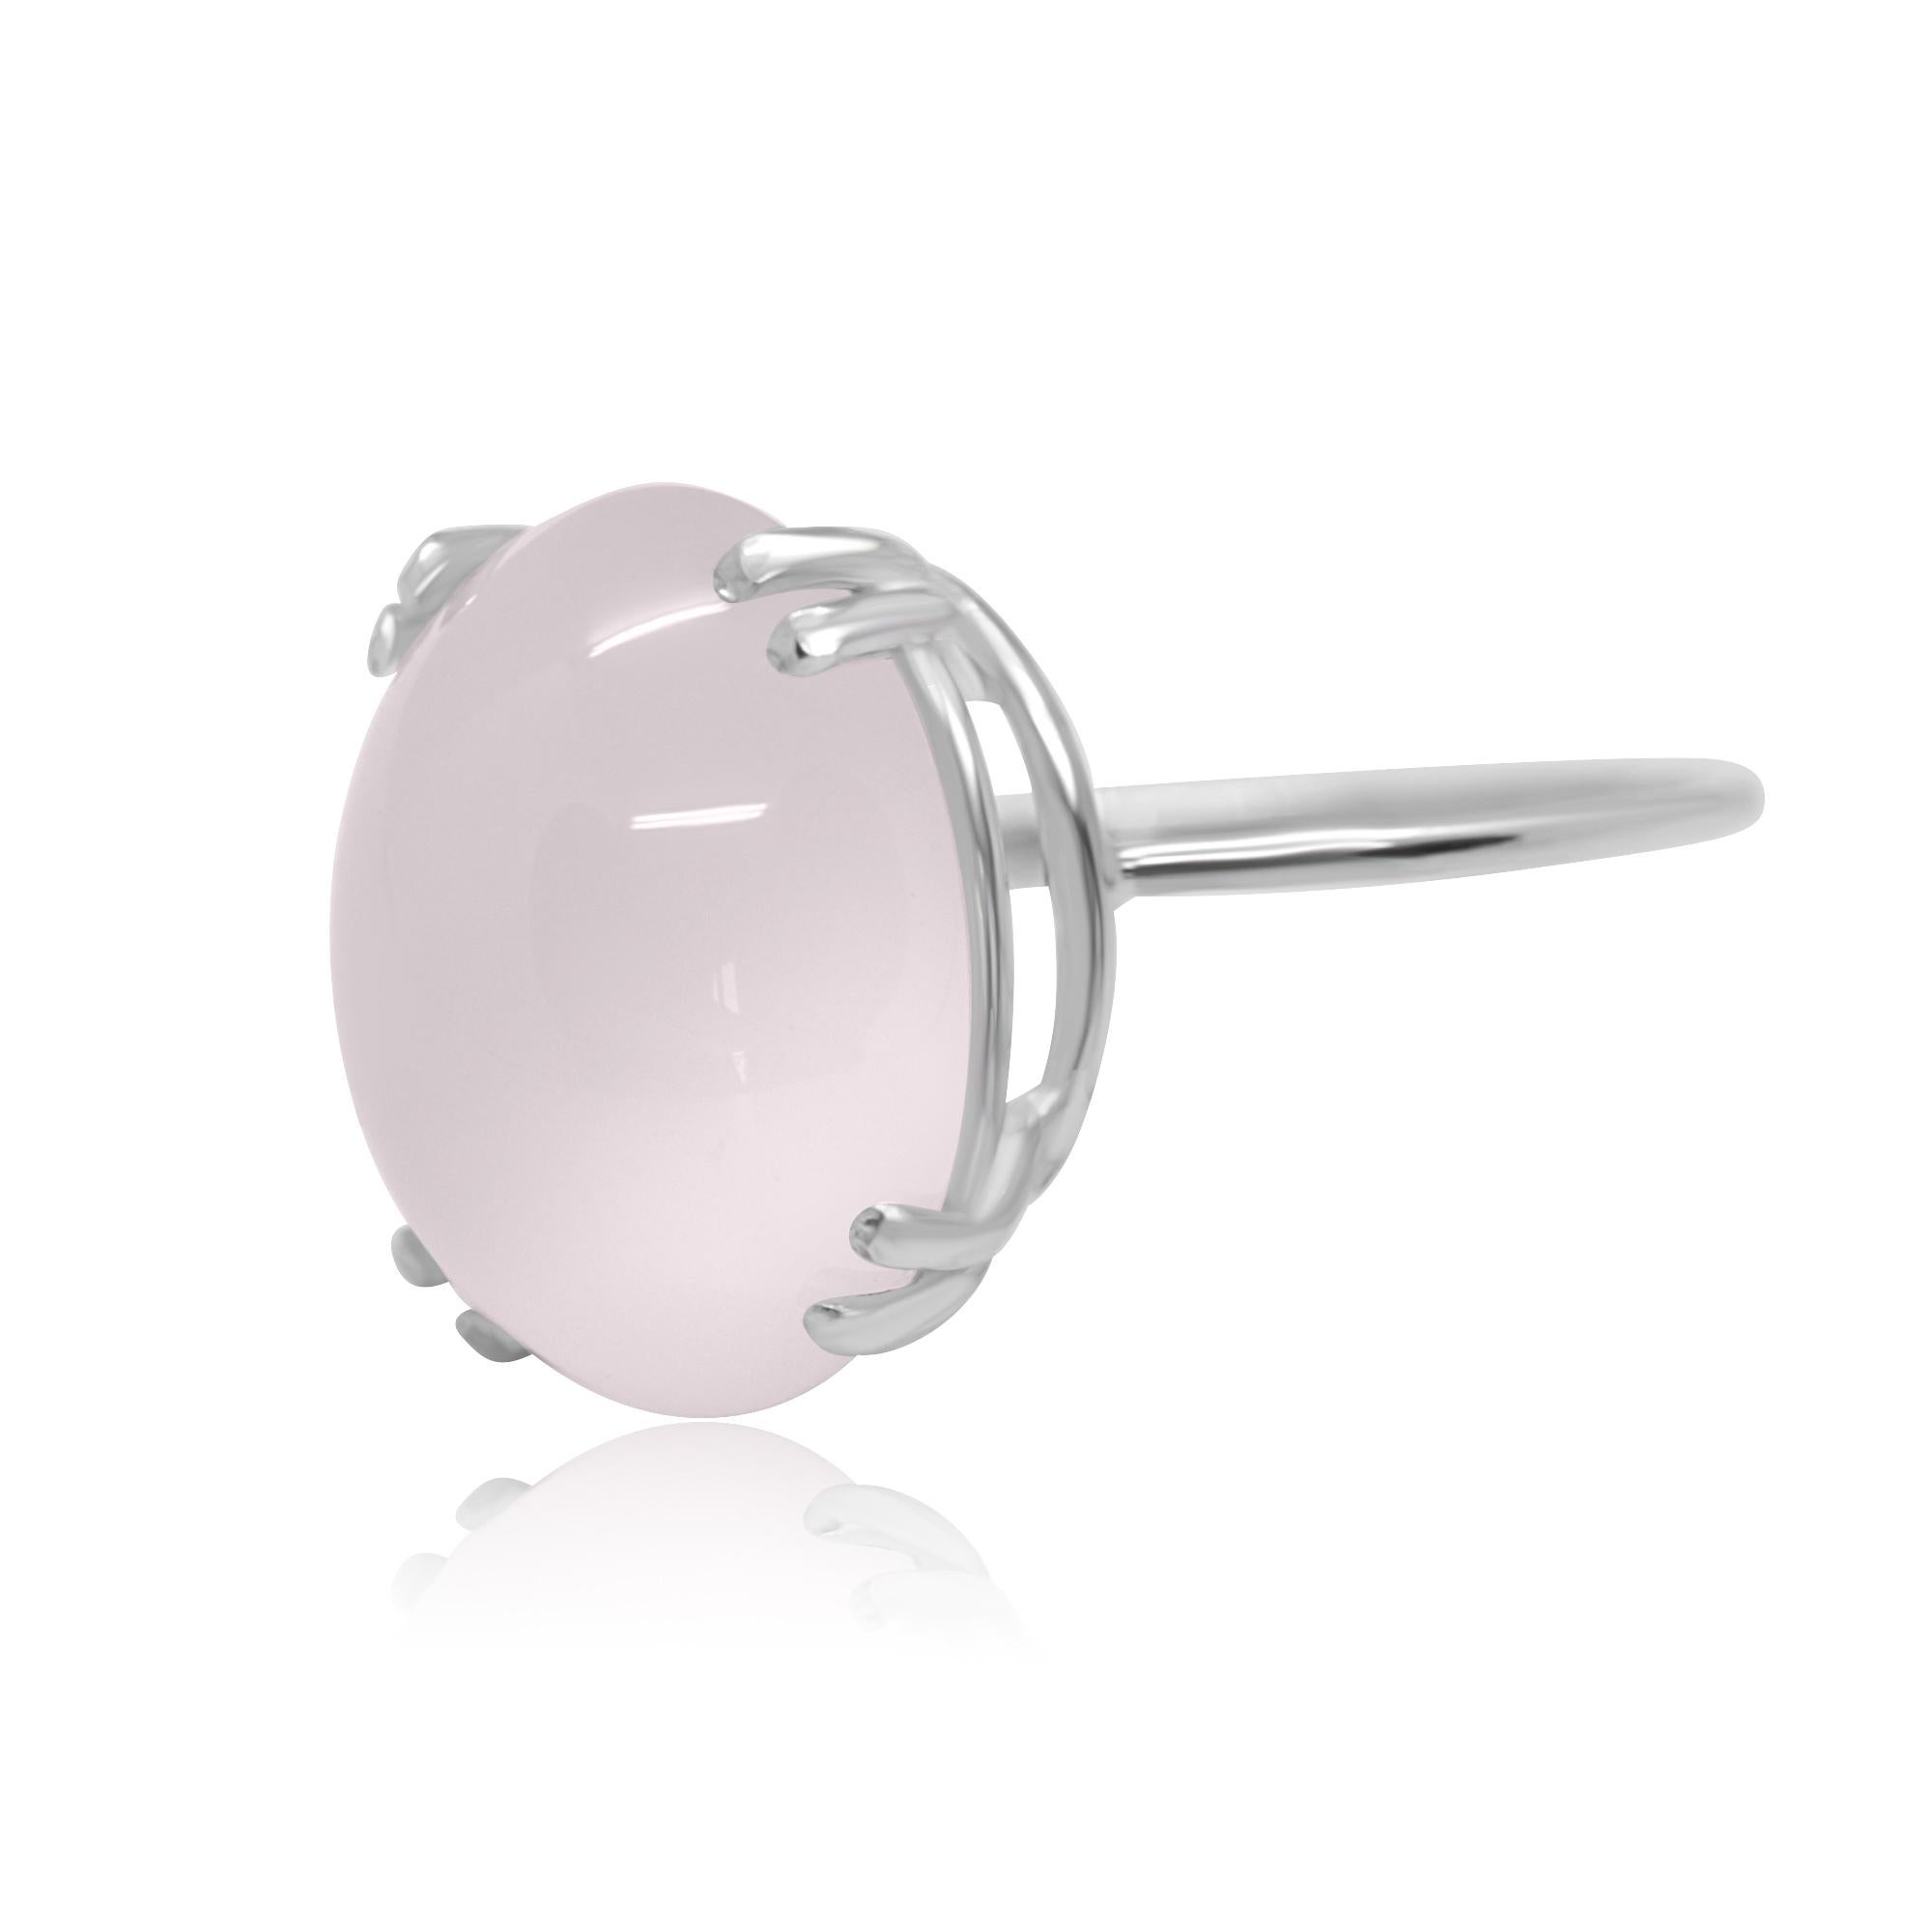 With a perfect size, it will fill with your daily elegant outfits. 

Cabochon cut solitaire ring design.

• 925 Sterling Silver
• Pink Quartz, 1.6 x 1.2 cm, oval cabochon cut, 10 carats
• Total weight 3.5 g
• Size: 14 (ITA), 54 (FR), 6 2/3 (US)
•